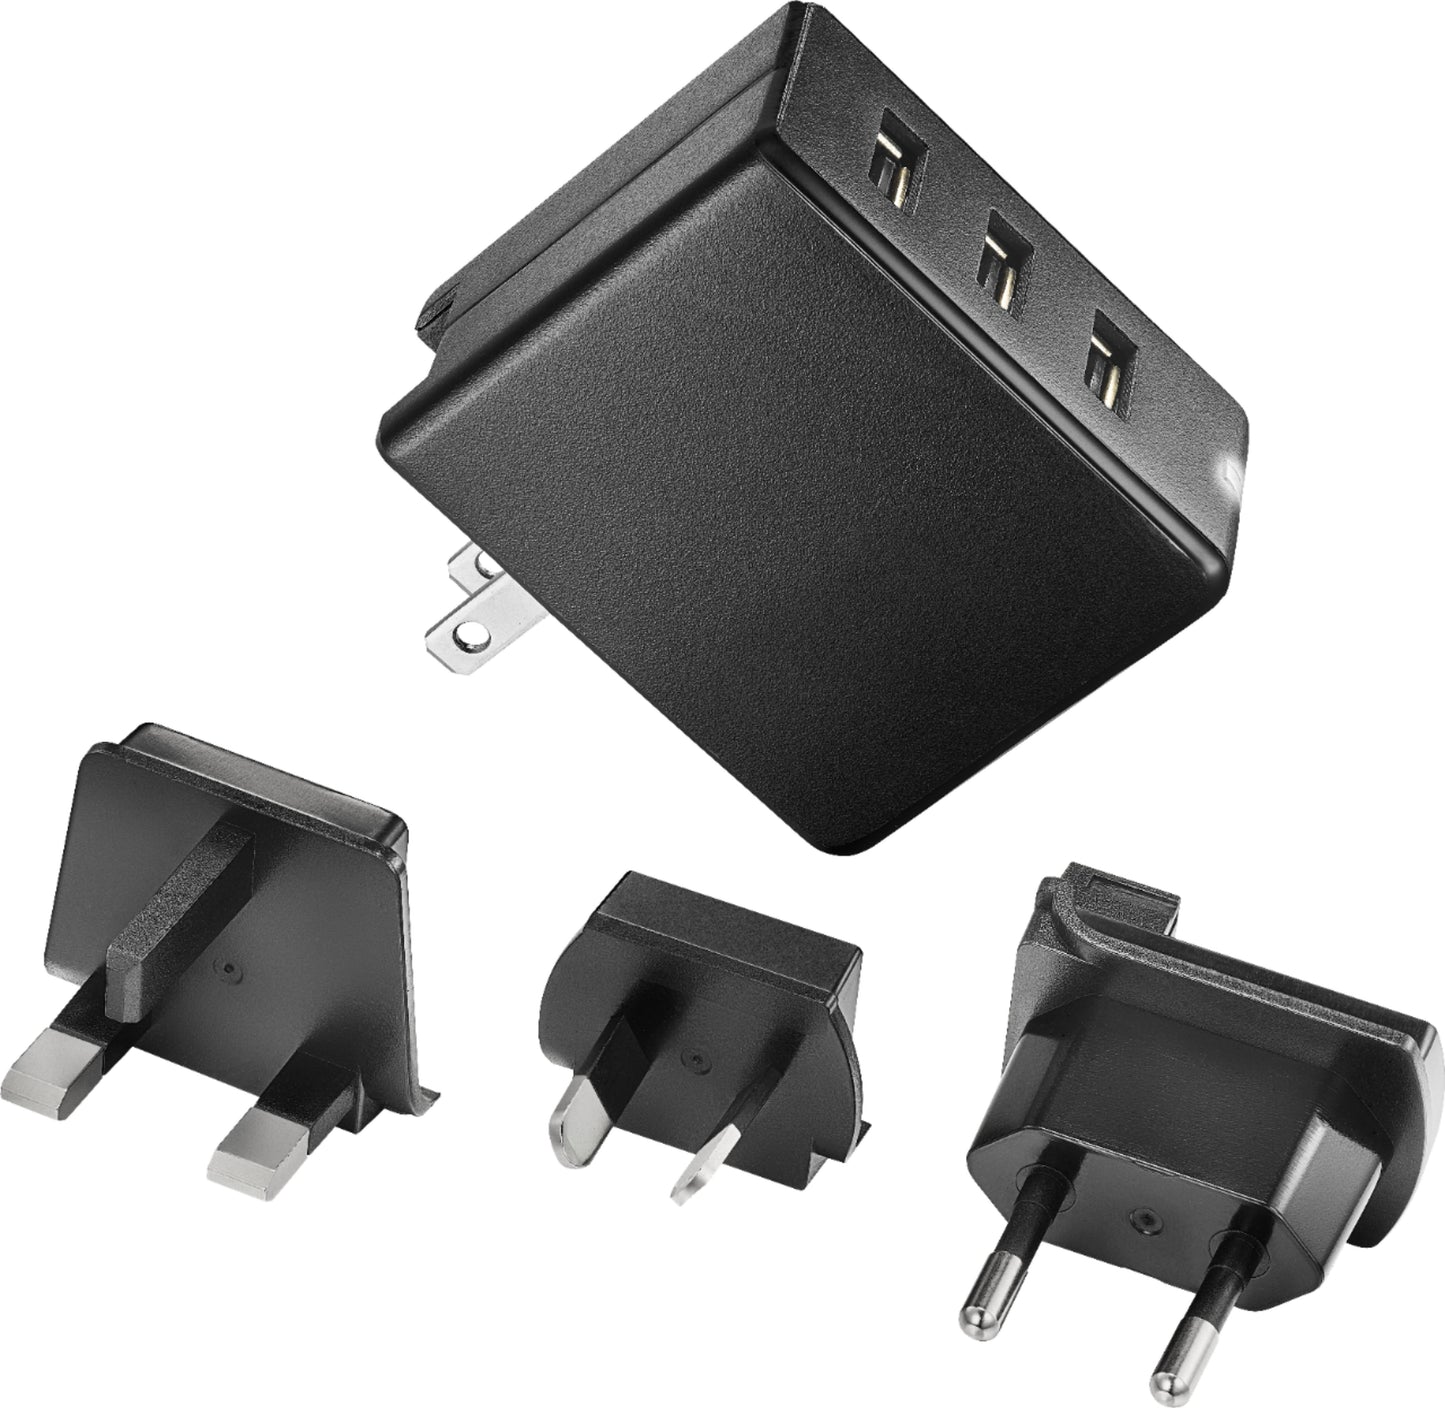 Insignia™ - 30W Foldable 3 USB Port Wall Charger with EU/UK/AU rechangeable plugs - Black